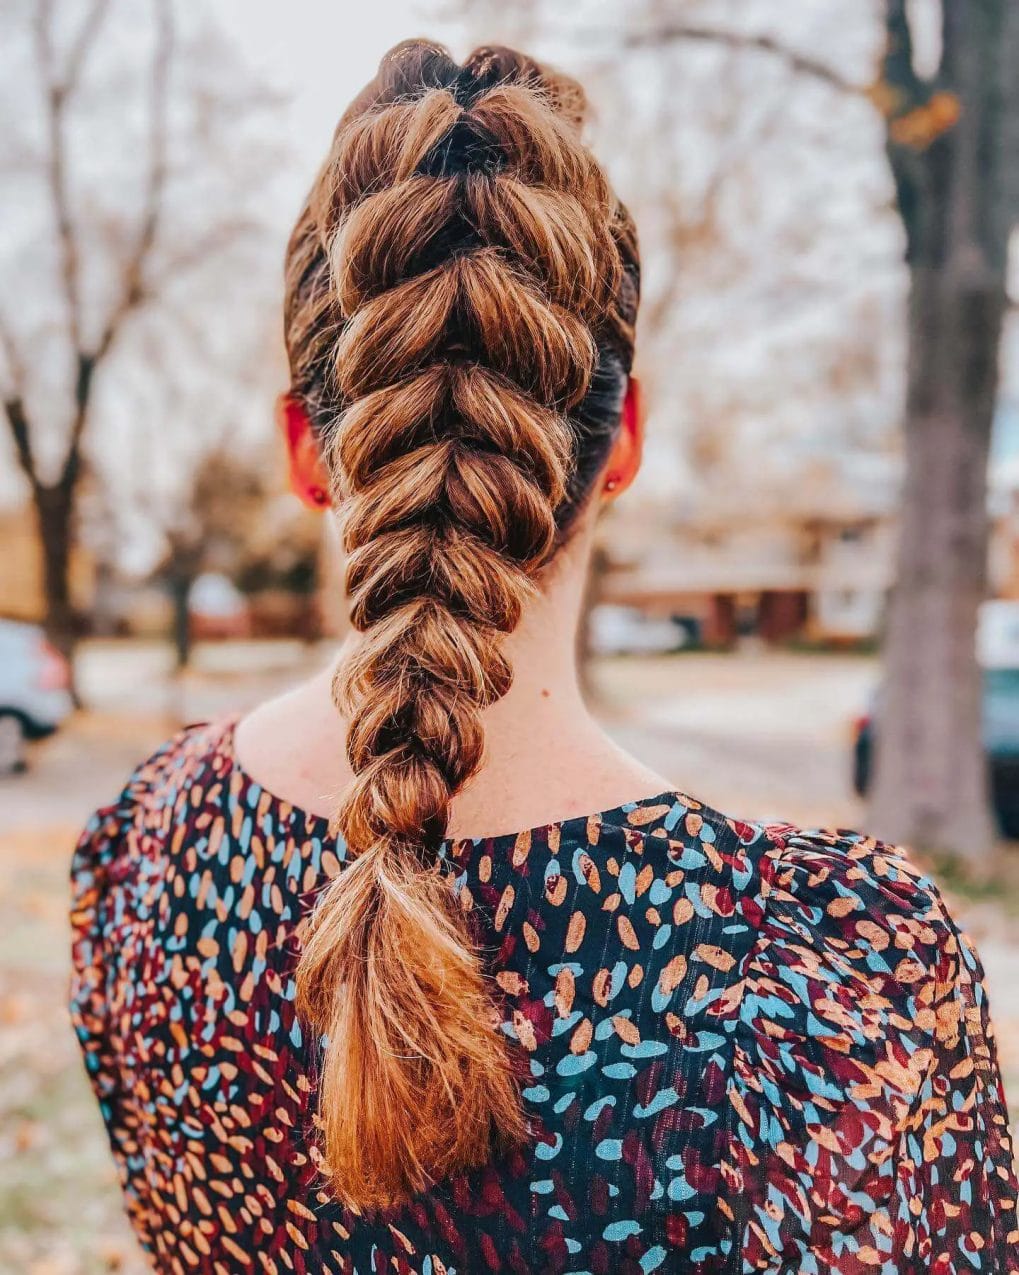 Voluminous French braid from crown into a full-bodied ponytail with chestnut and honey tones.